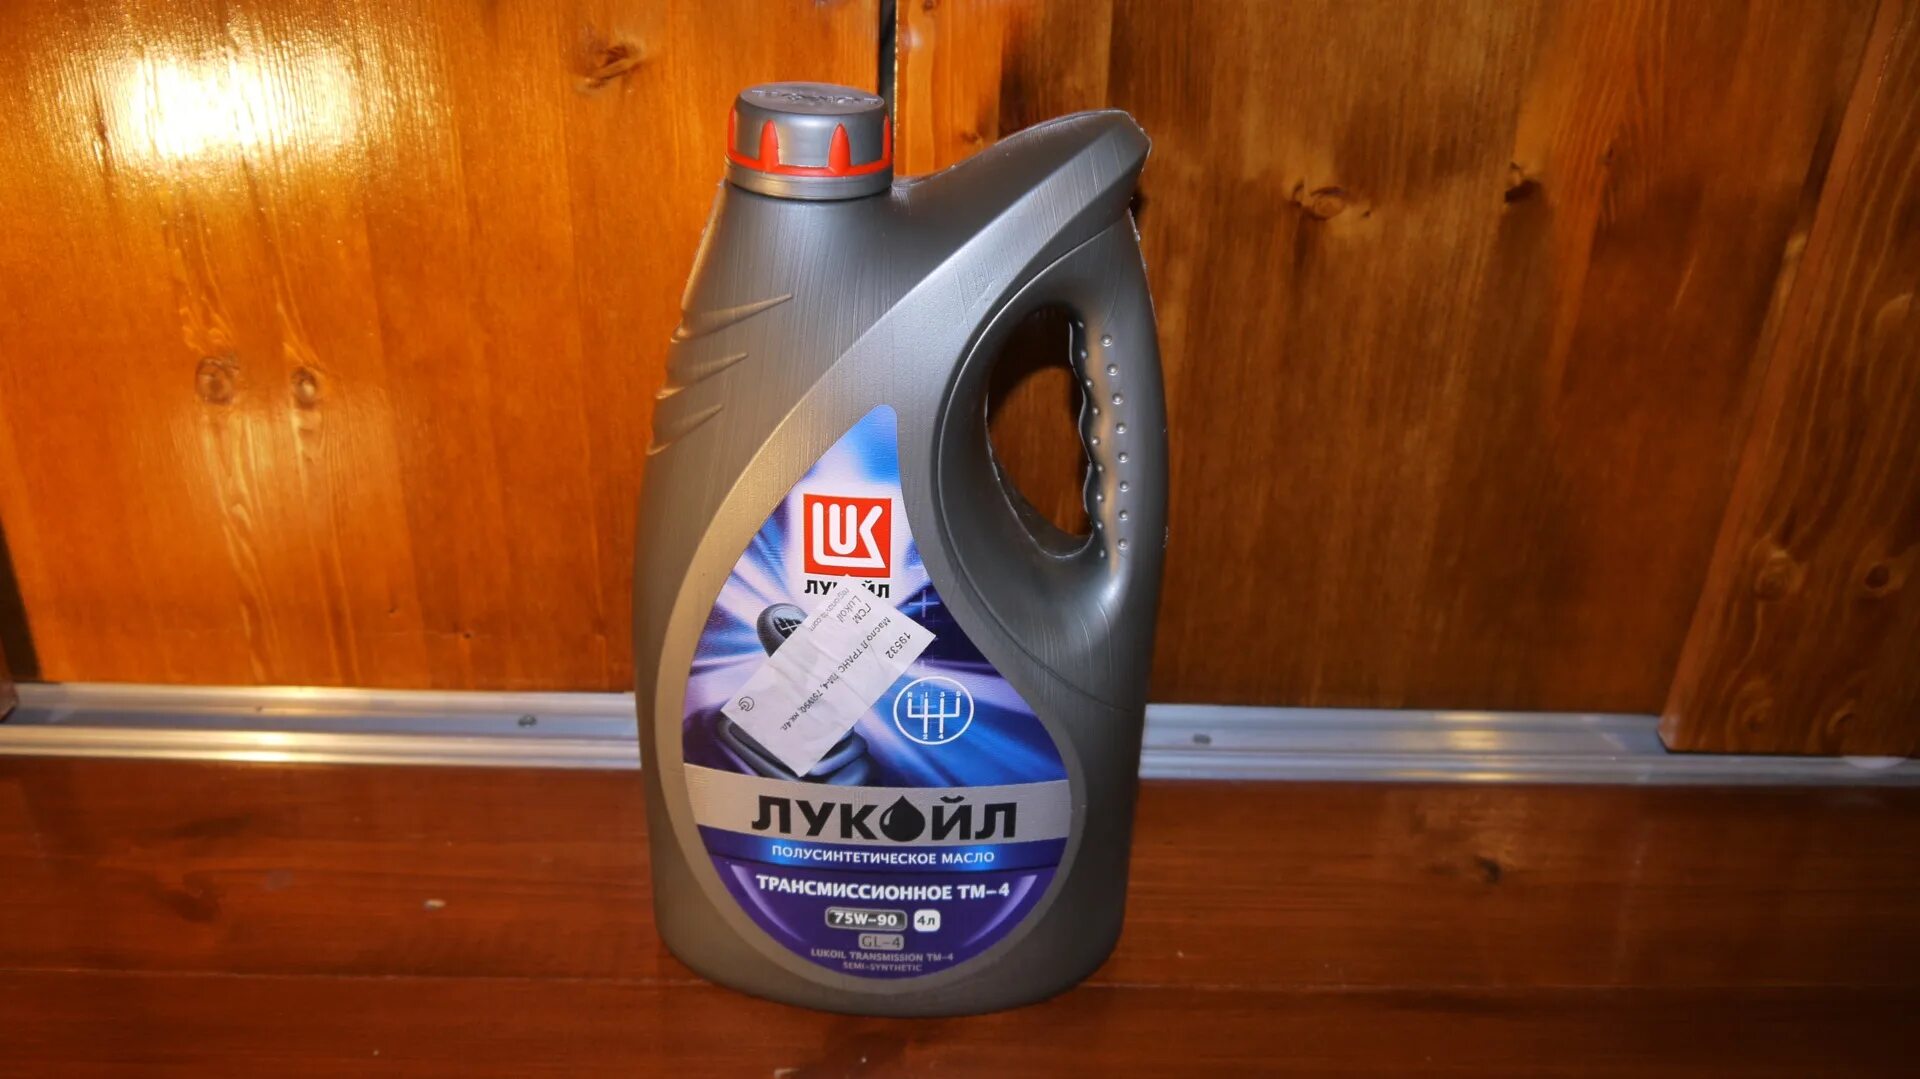 Масло Лукойл 75w90. Лукойл ТМ-4 75w-90 фф3. Лукойл ТМ 4. Lukoil 75w90 20л. Масло лукойл 75 90